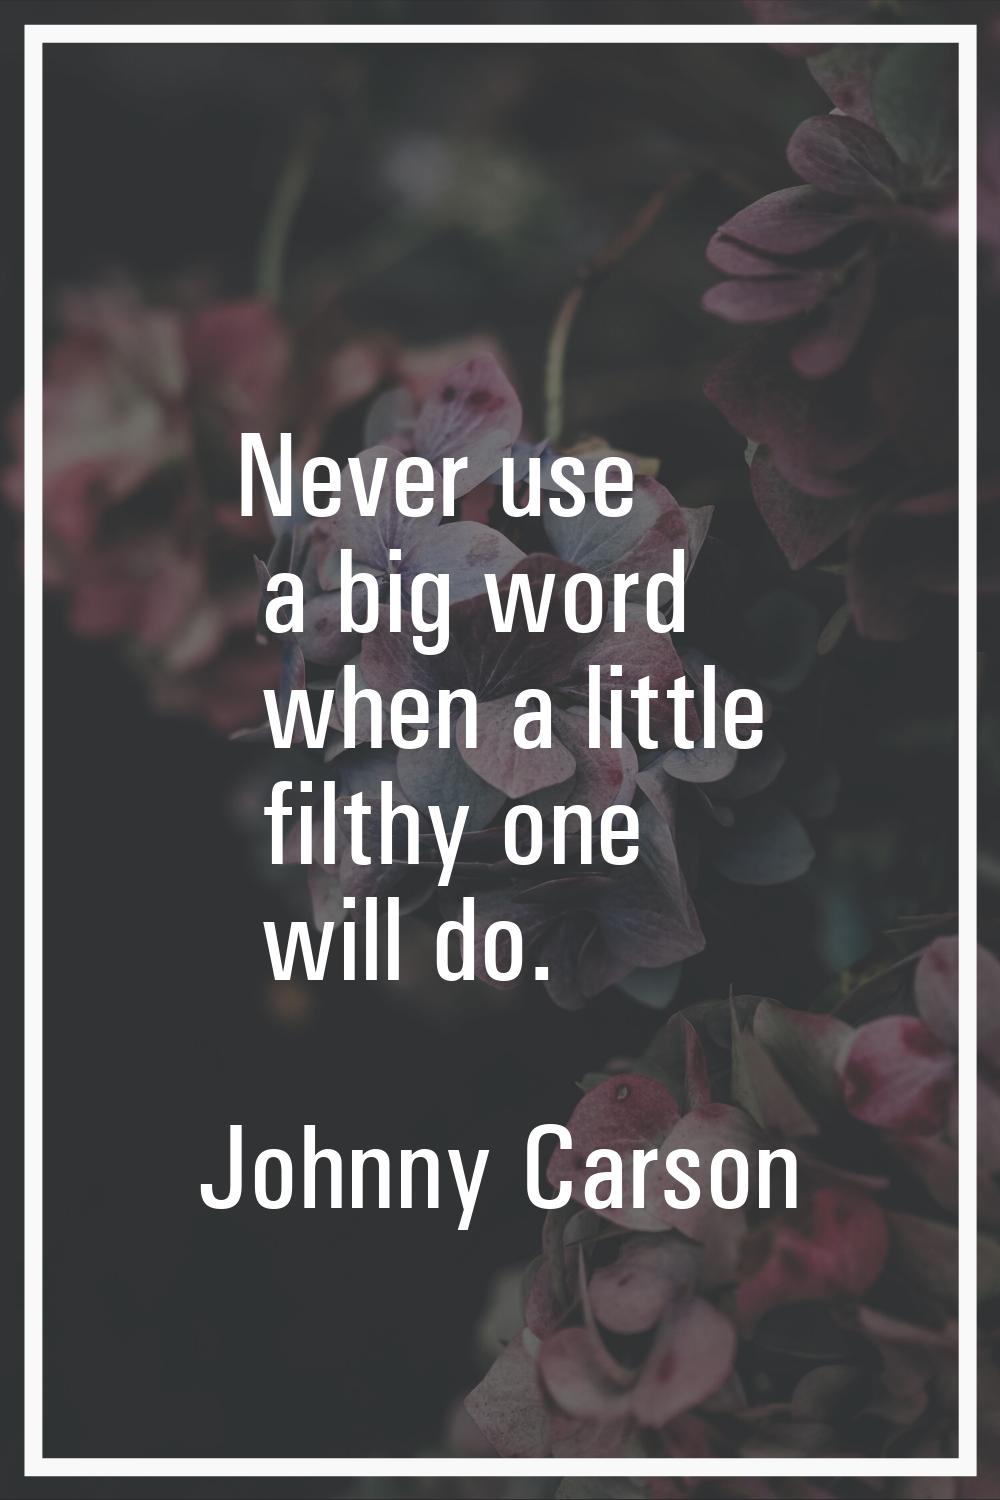 Never use a big word when a little filthy one will do.